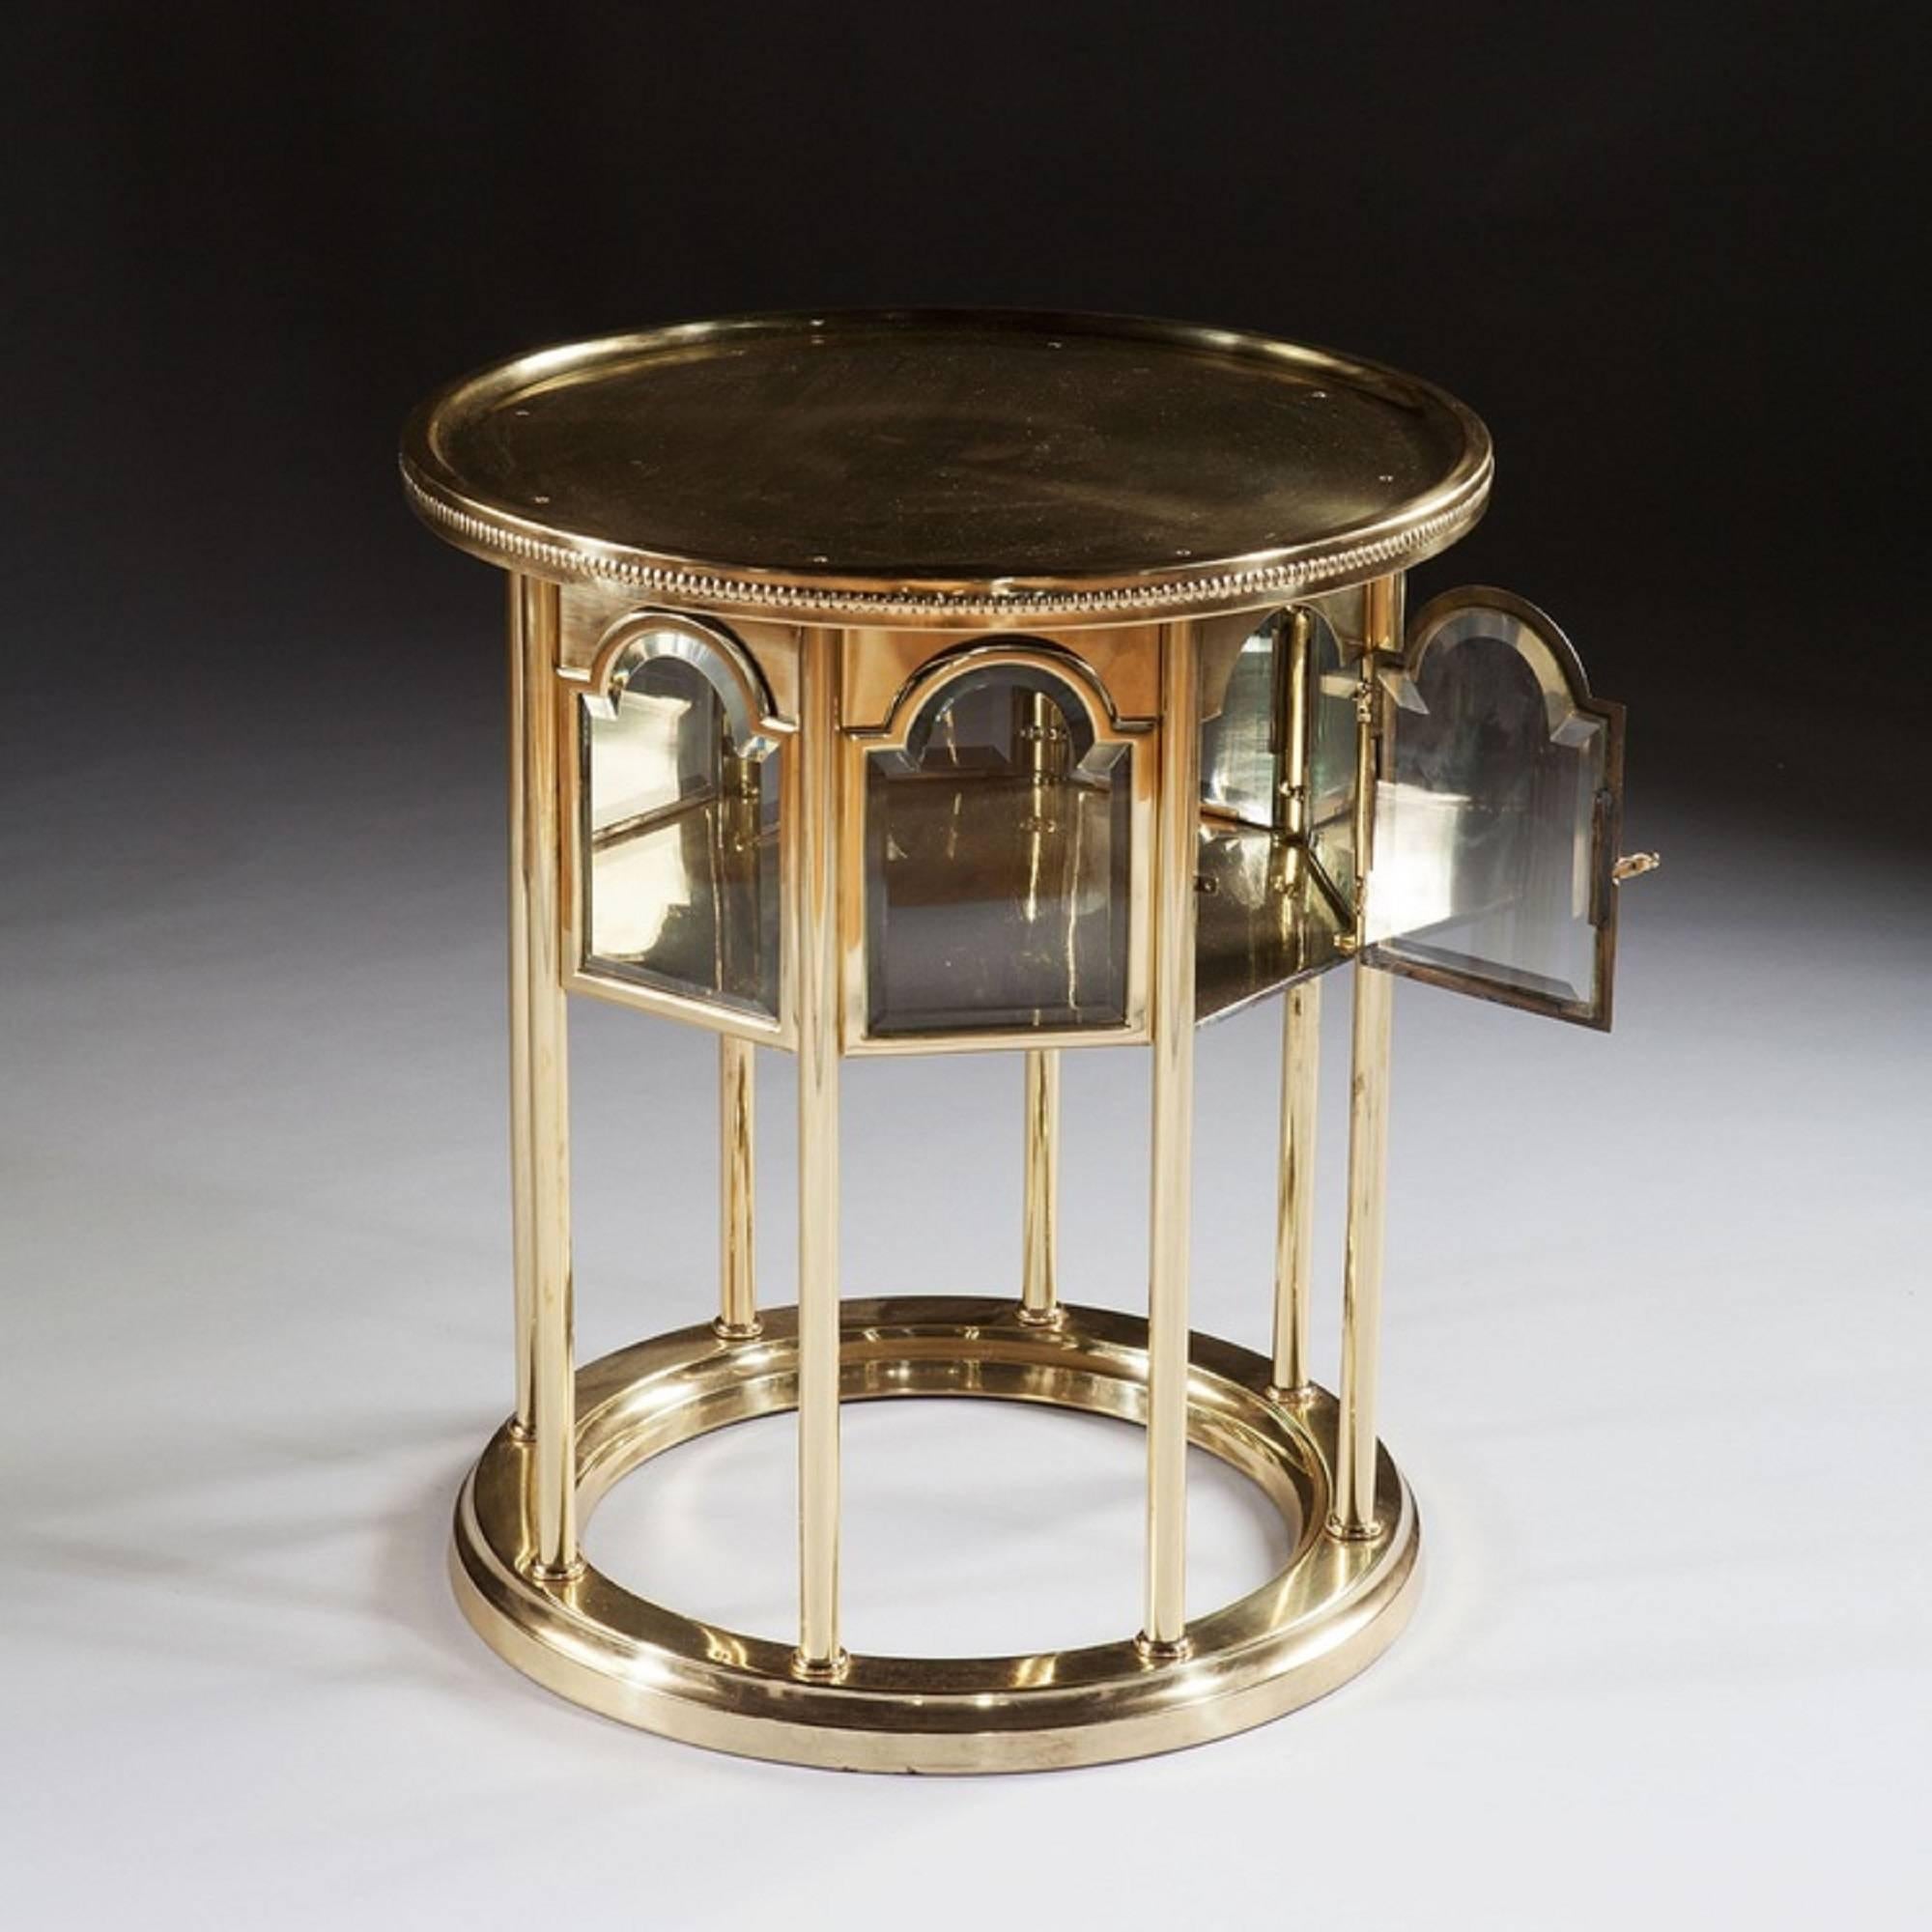 Nicholas Wells Antiques is delighted to offer this stunning Mid Century Modern polished brass circular occasional table or Side table. The design relates strongly to the mid century work in Vienna where Moorish designs flourished for a short